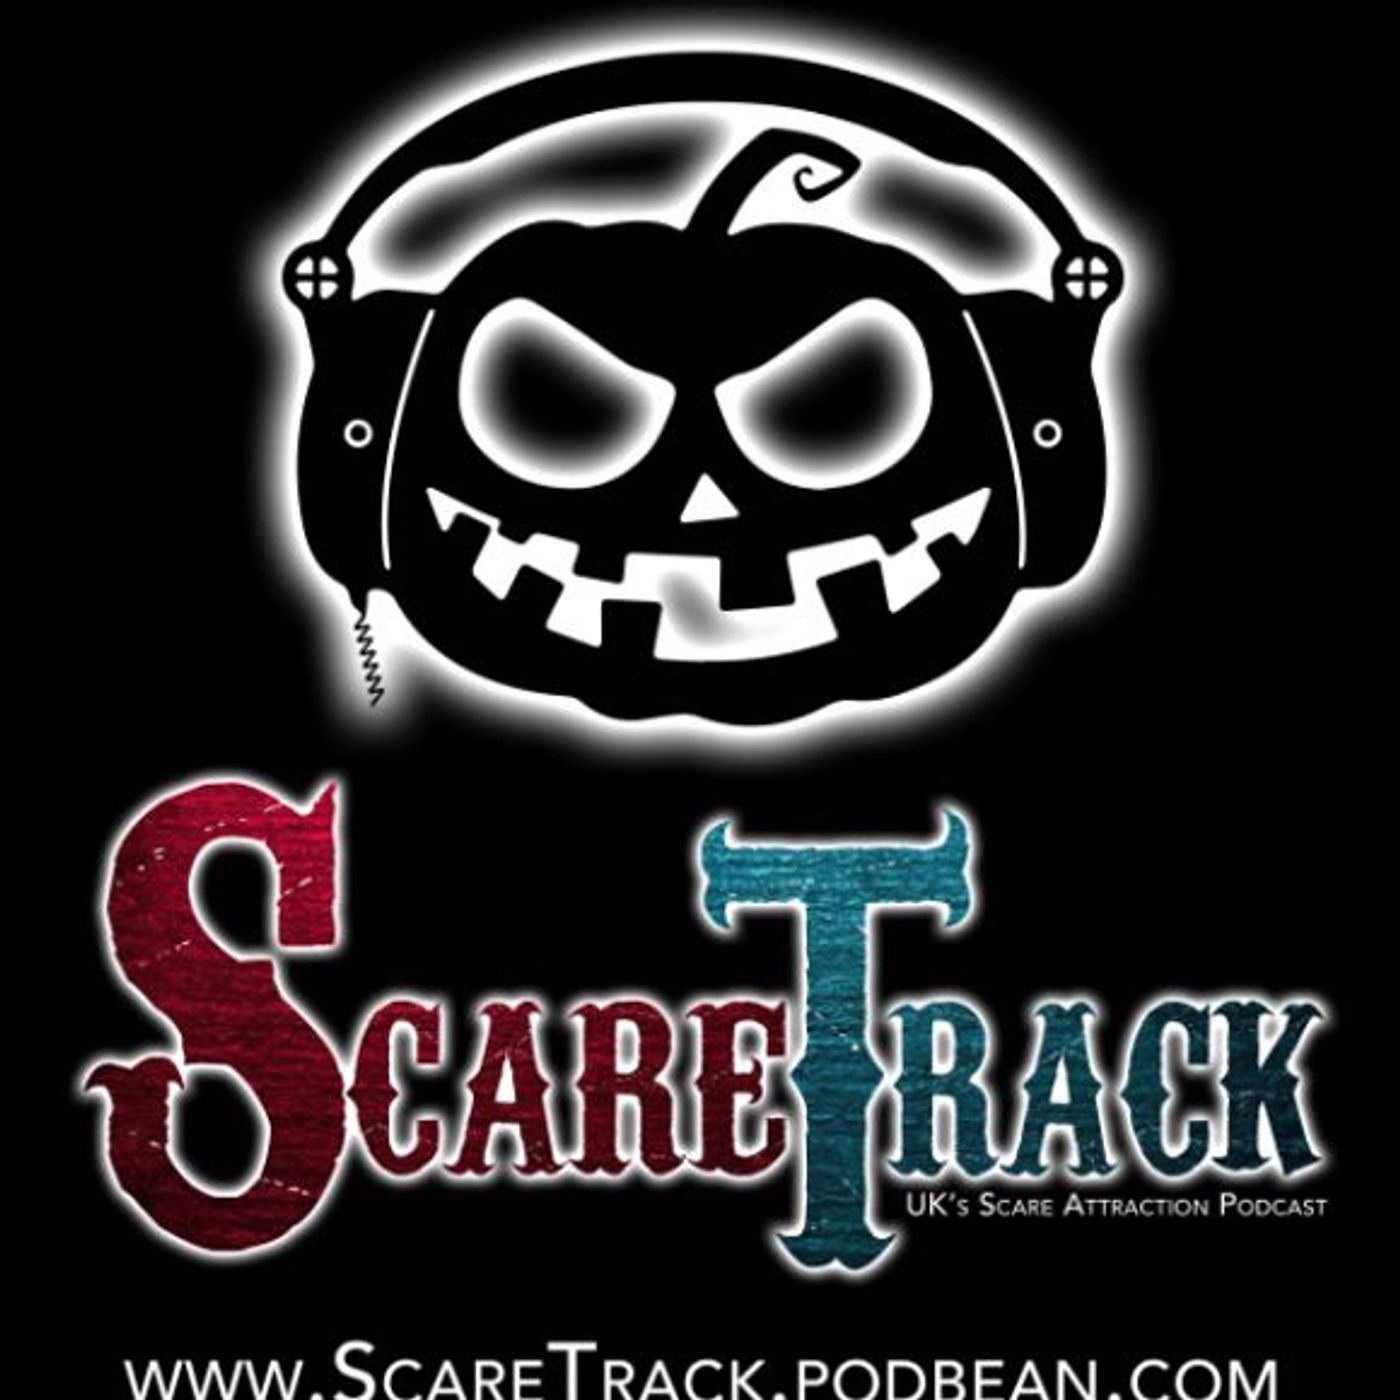 [ScareTrack] Scott Swenson on Following the Story at your Scare Attraction